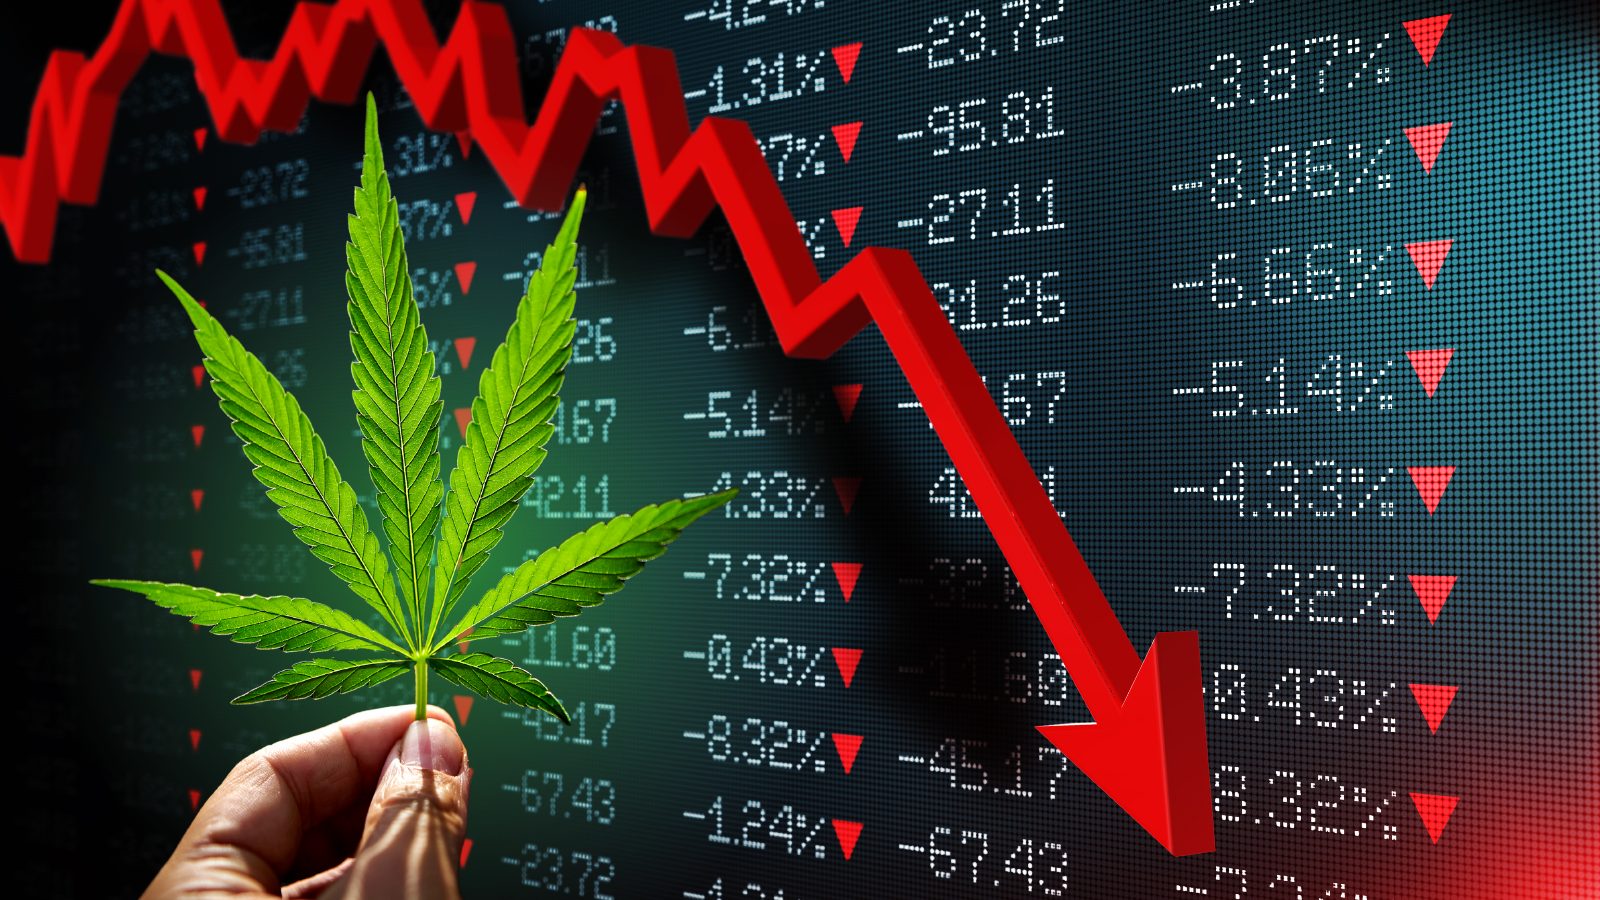 The Erosion of Value: Analyzing the Decline of a Once-Prominent Cannabis Firm